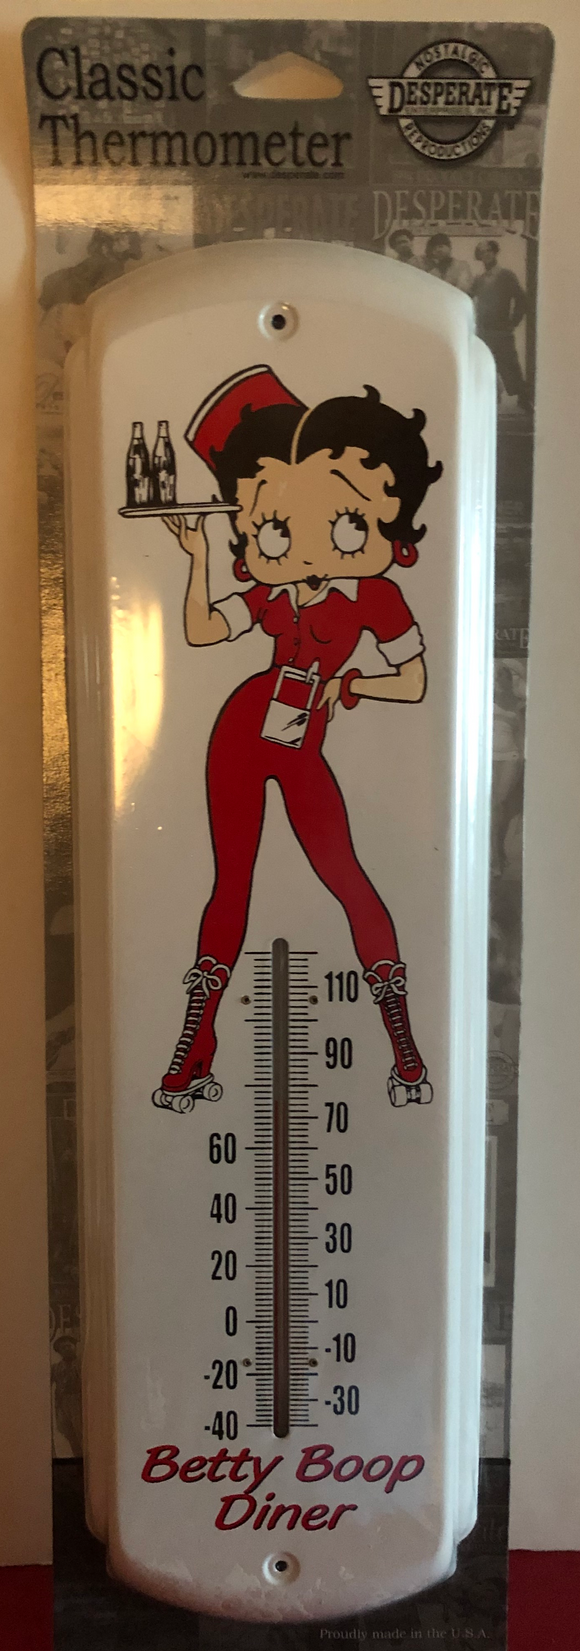 Betty Boop Classic Diner Thermometer